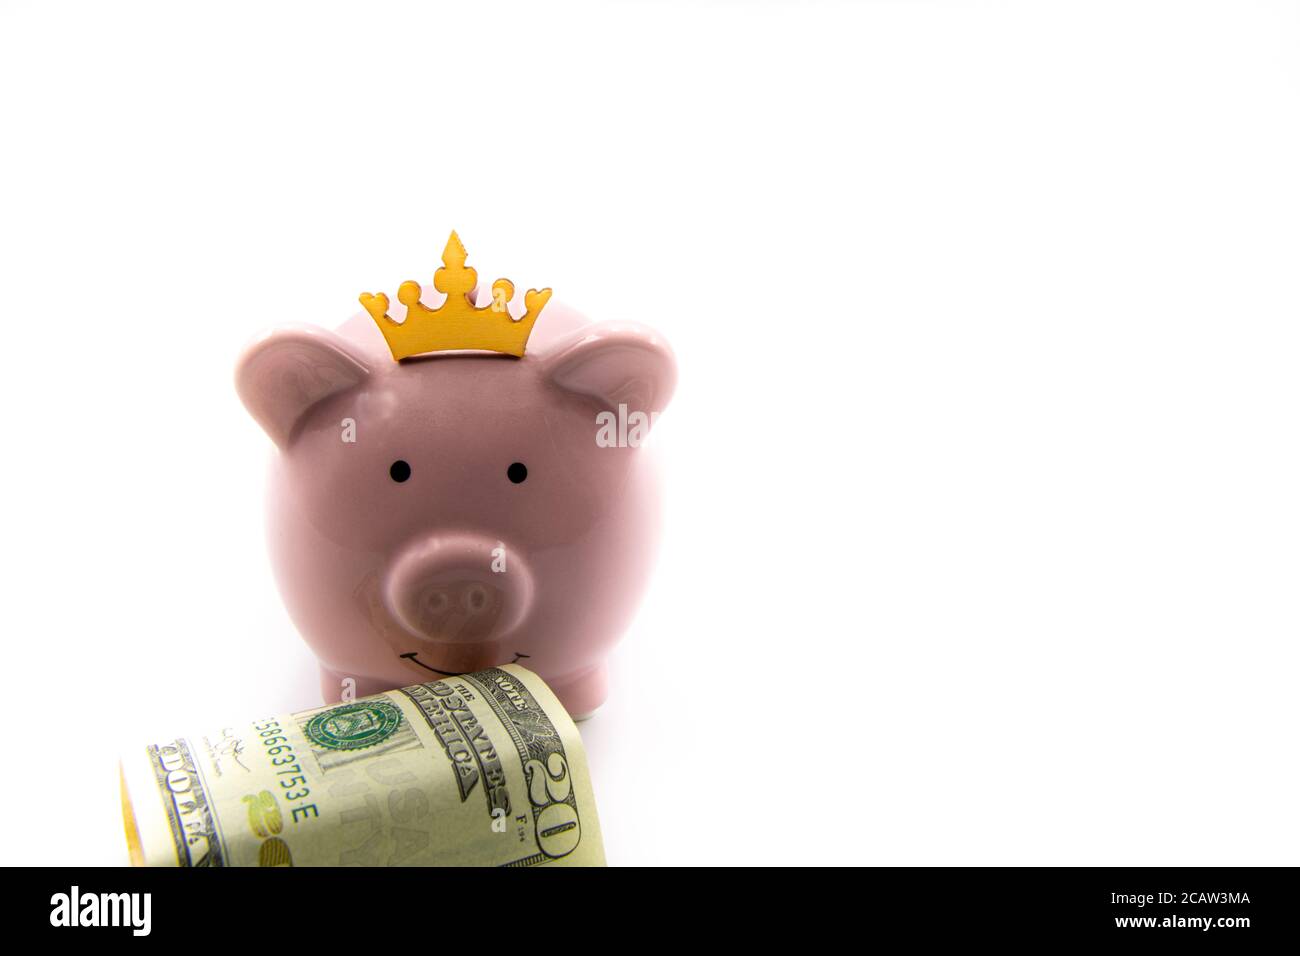 Pink piggy bank with golden crown and stack of US dollars in front isolated over white background with copy space, cash is king concept image Stock Photo